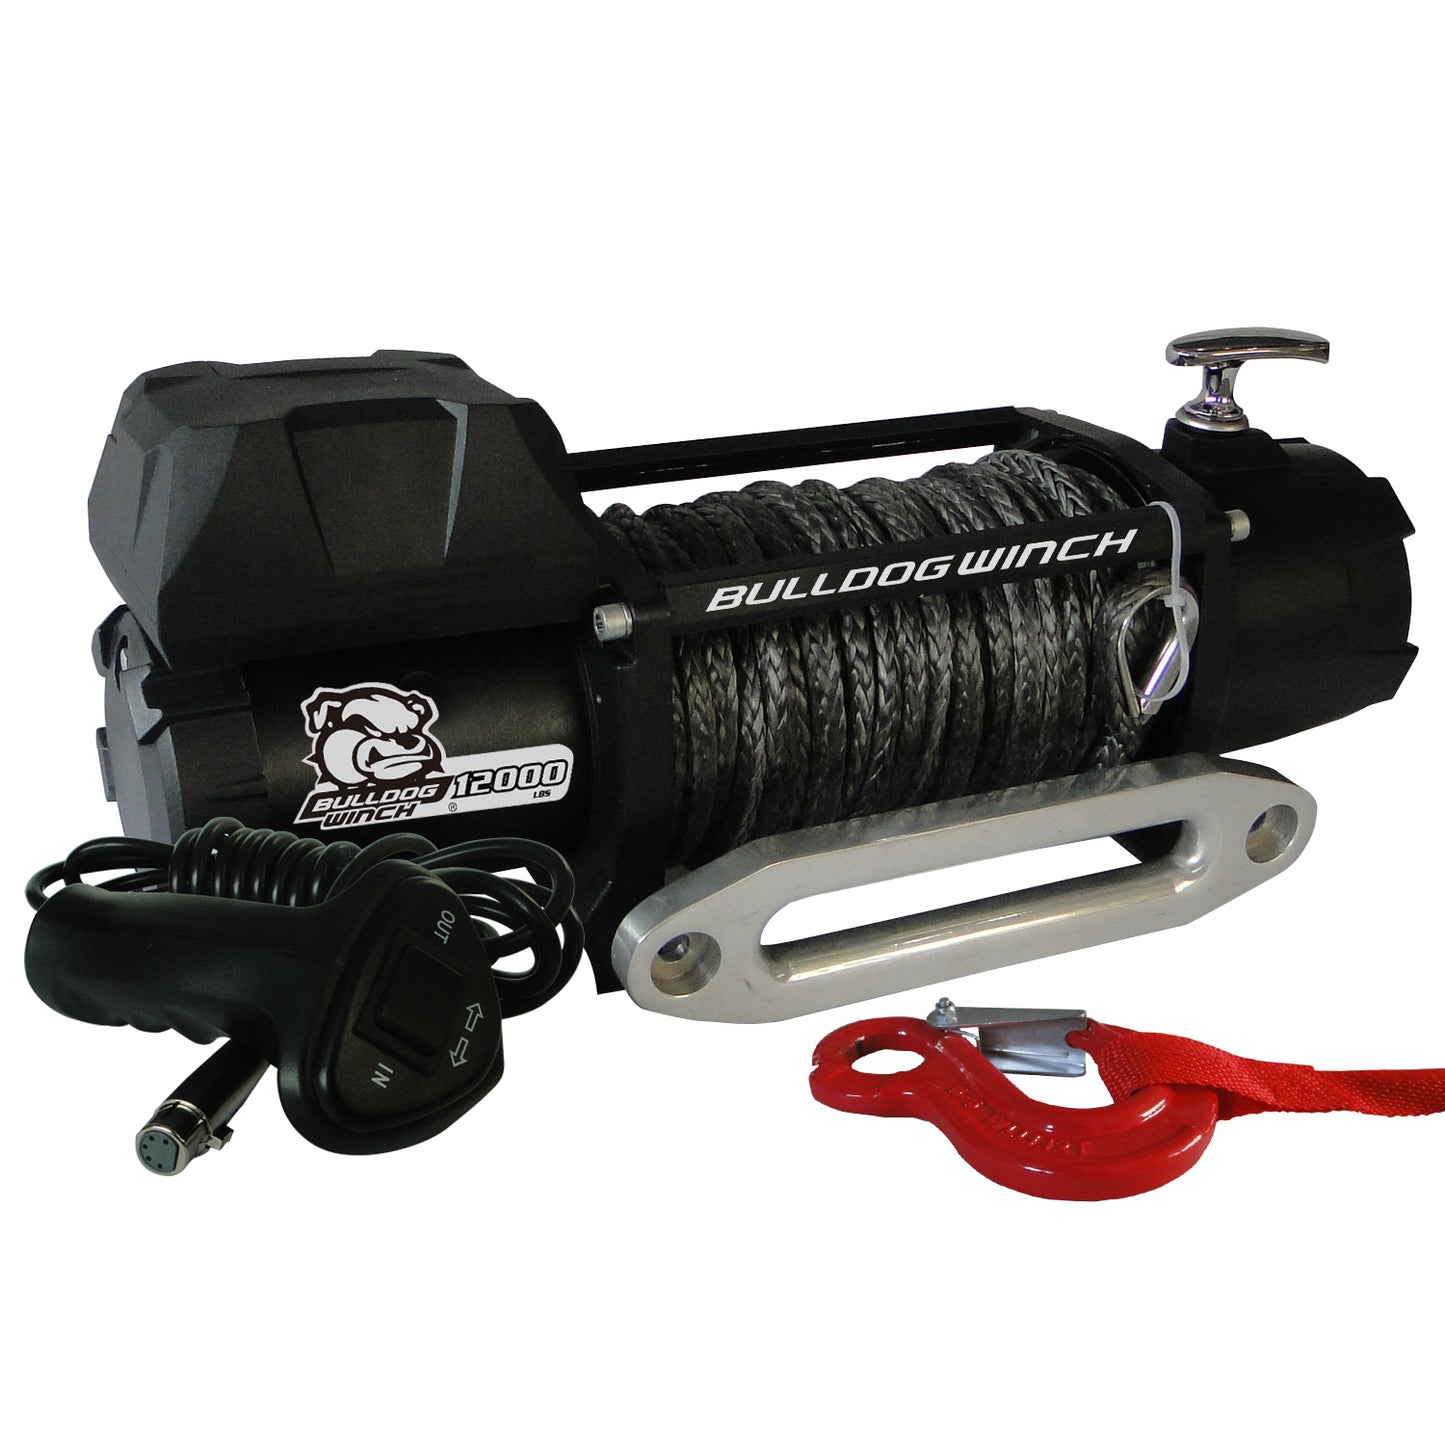 Bulldog Winch 12,00 LB Winch 100 Ft Synthetic Rope 6.0hp Series Wound Motor Roller Fairlead